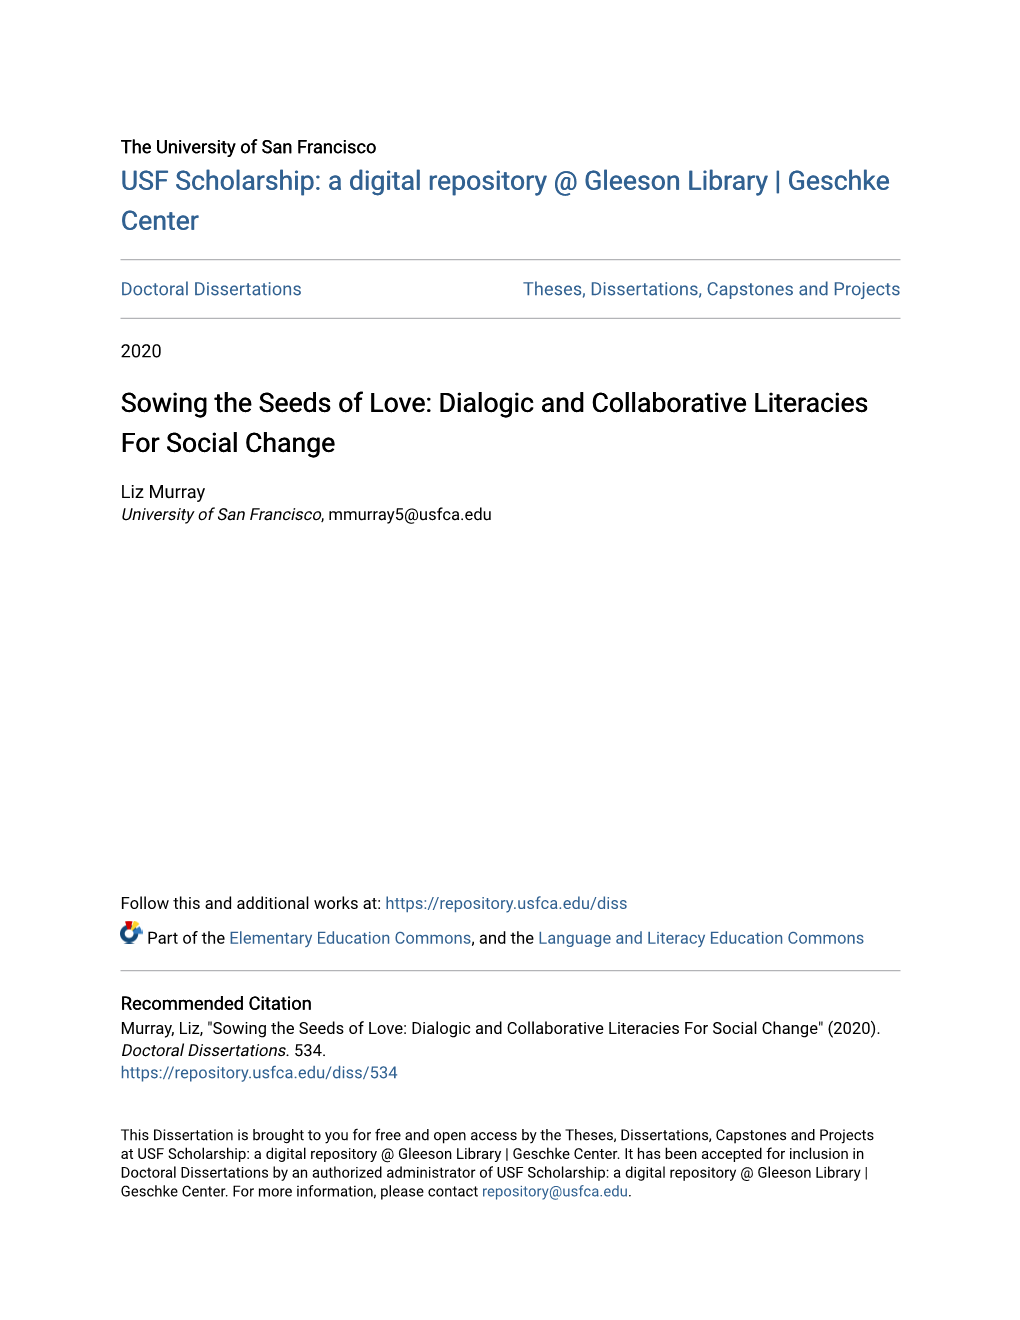 Sowing the Seeds of Love: Dialogic and Collaborative Literacies for Social Change